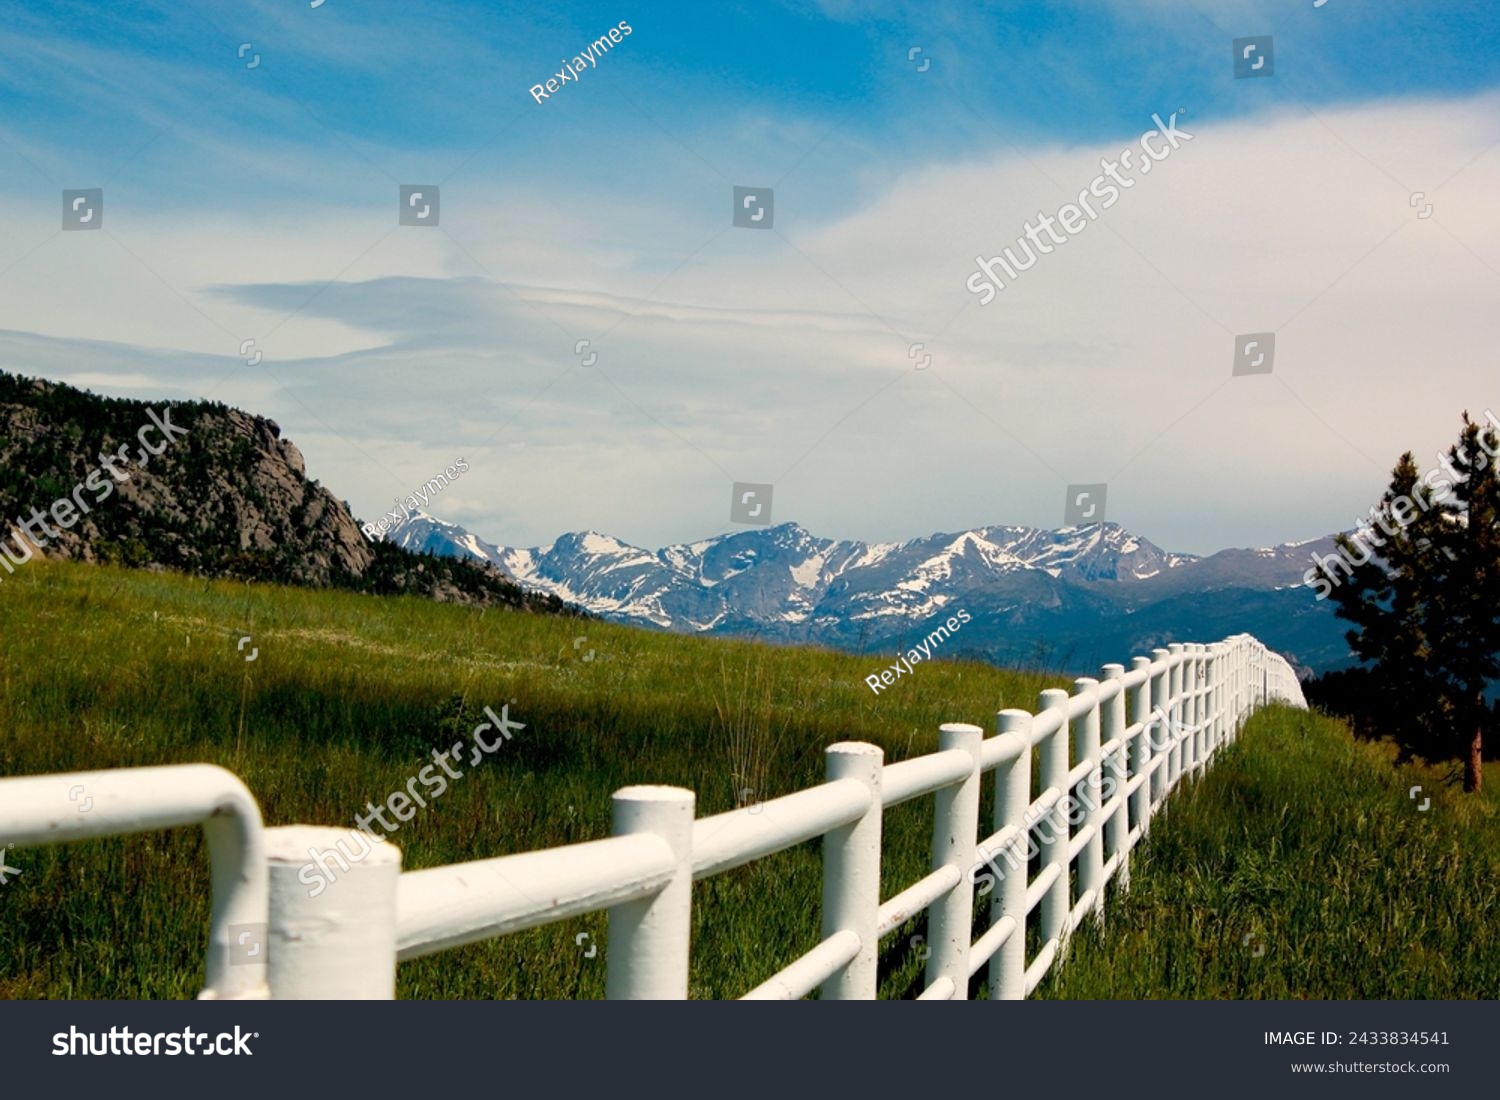 White rail fence with green grass and mountains in background.  Colorado high country scene of rural area.  Blue sky and white clouds. White fence with hills and mountains in the background.   #2433834541